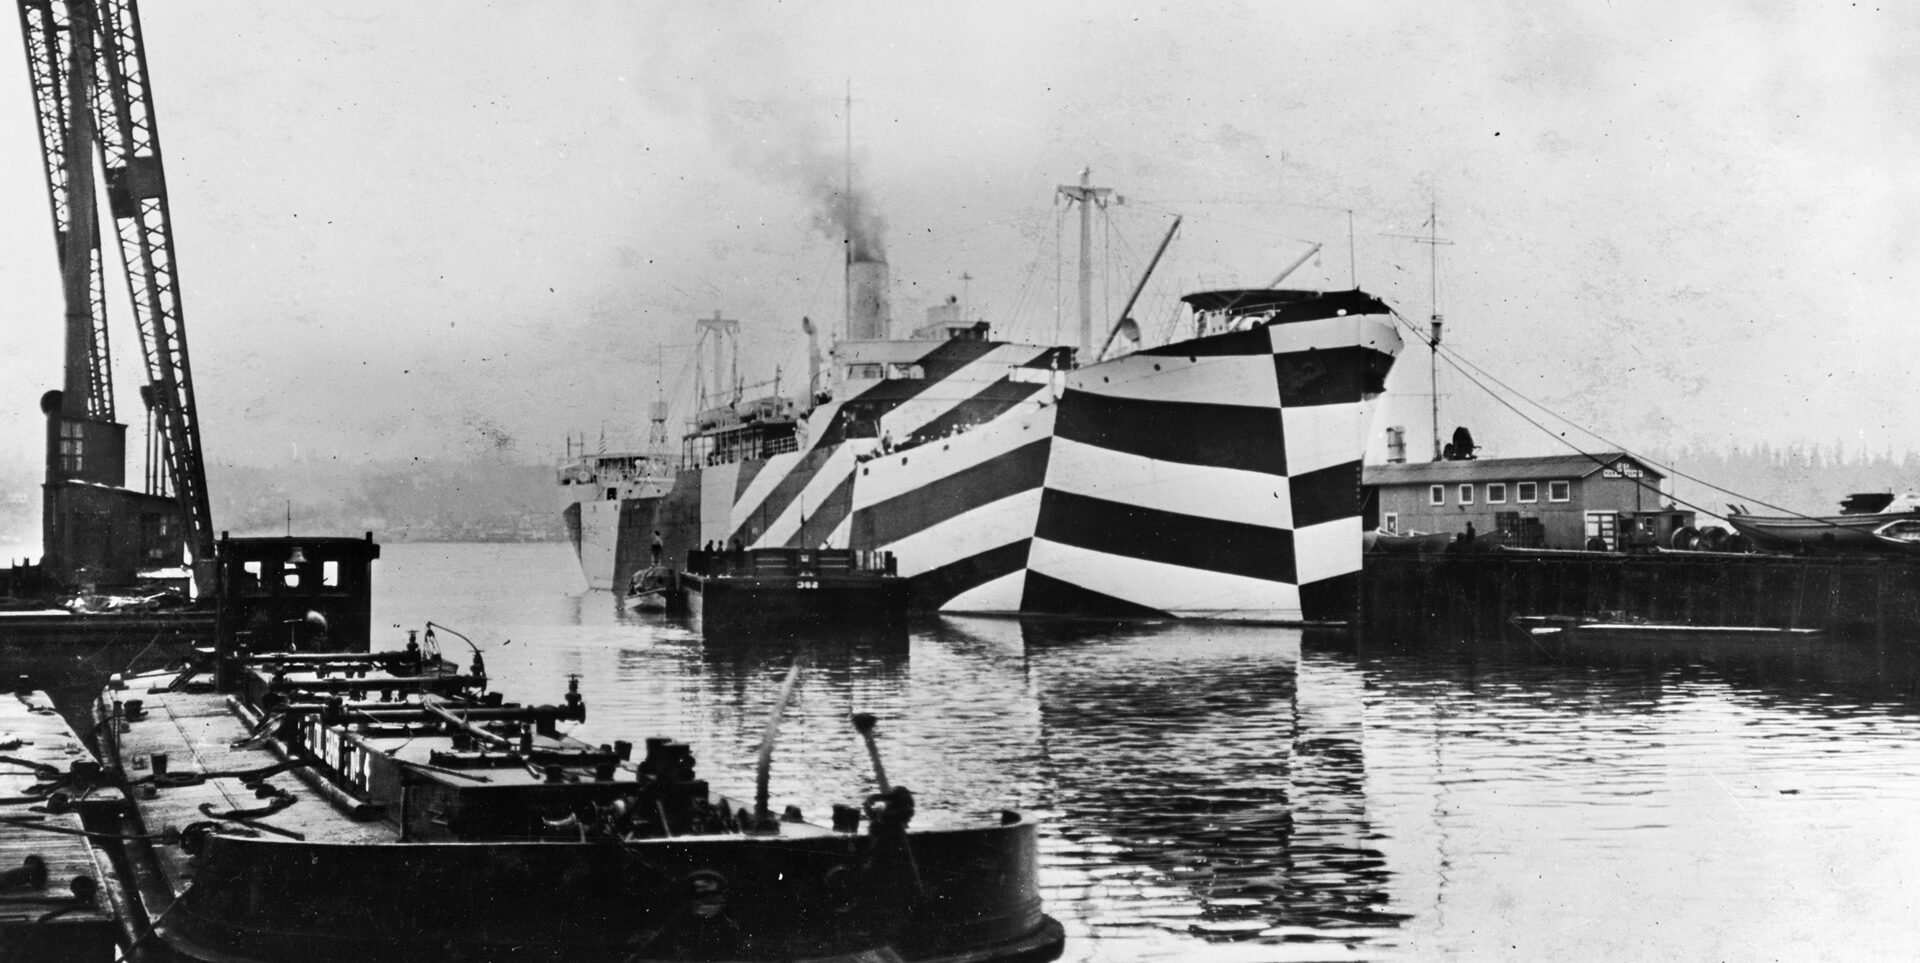 Painted in dazzle camouflage, the USS West Mahomet illustrates how the paint scheme distorts the apparent aspect of the bow. The three-dimensional effect completely fools the eye of an observer, making the ship hard to identify. 